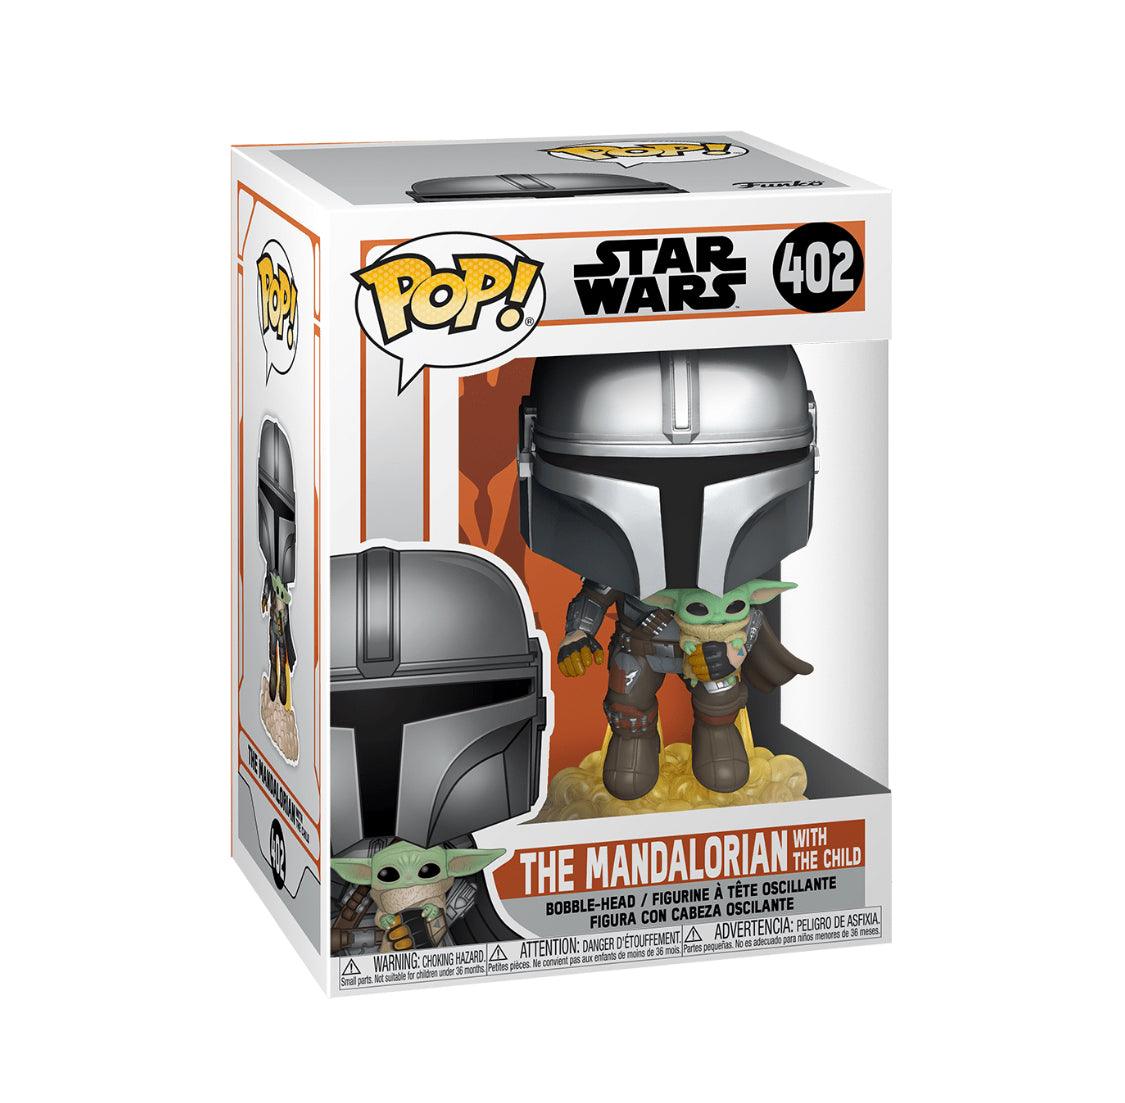 Pop! Star Wars - The Mandalorian With The Child - #402 - Hobby Champion Inc